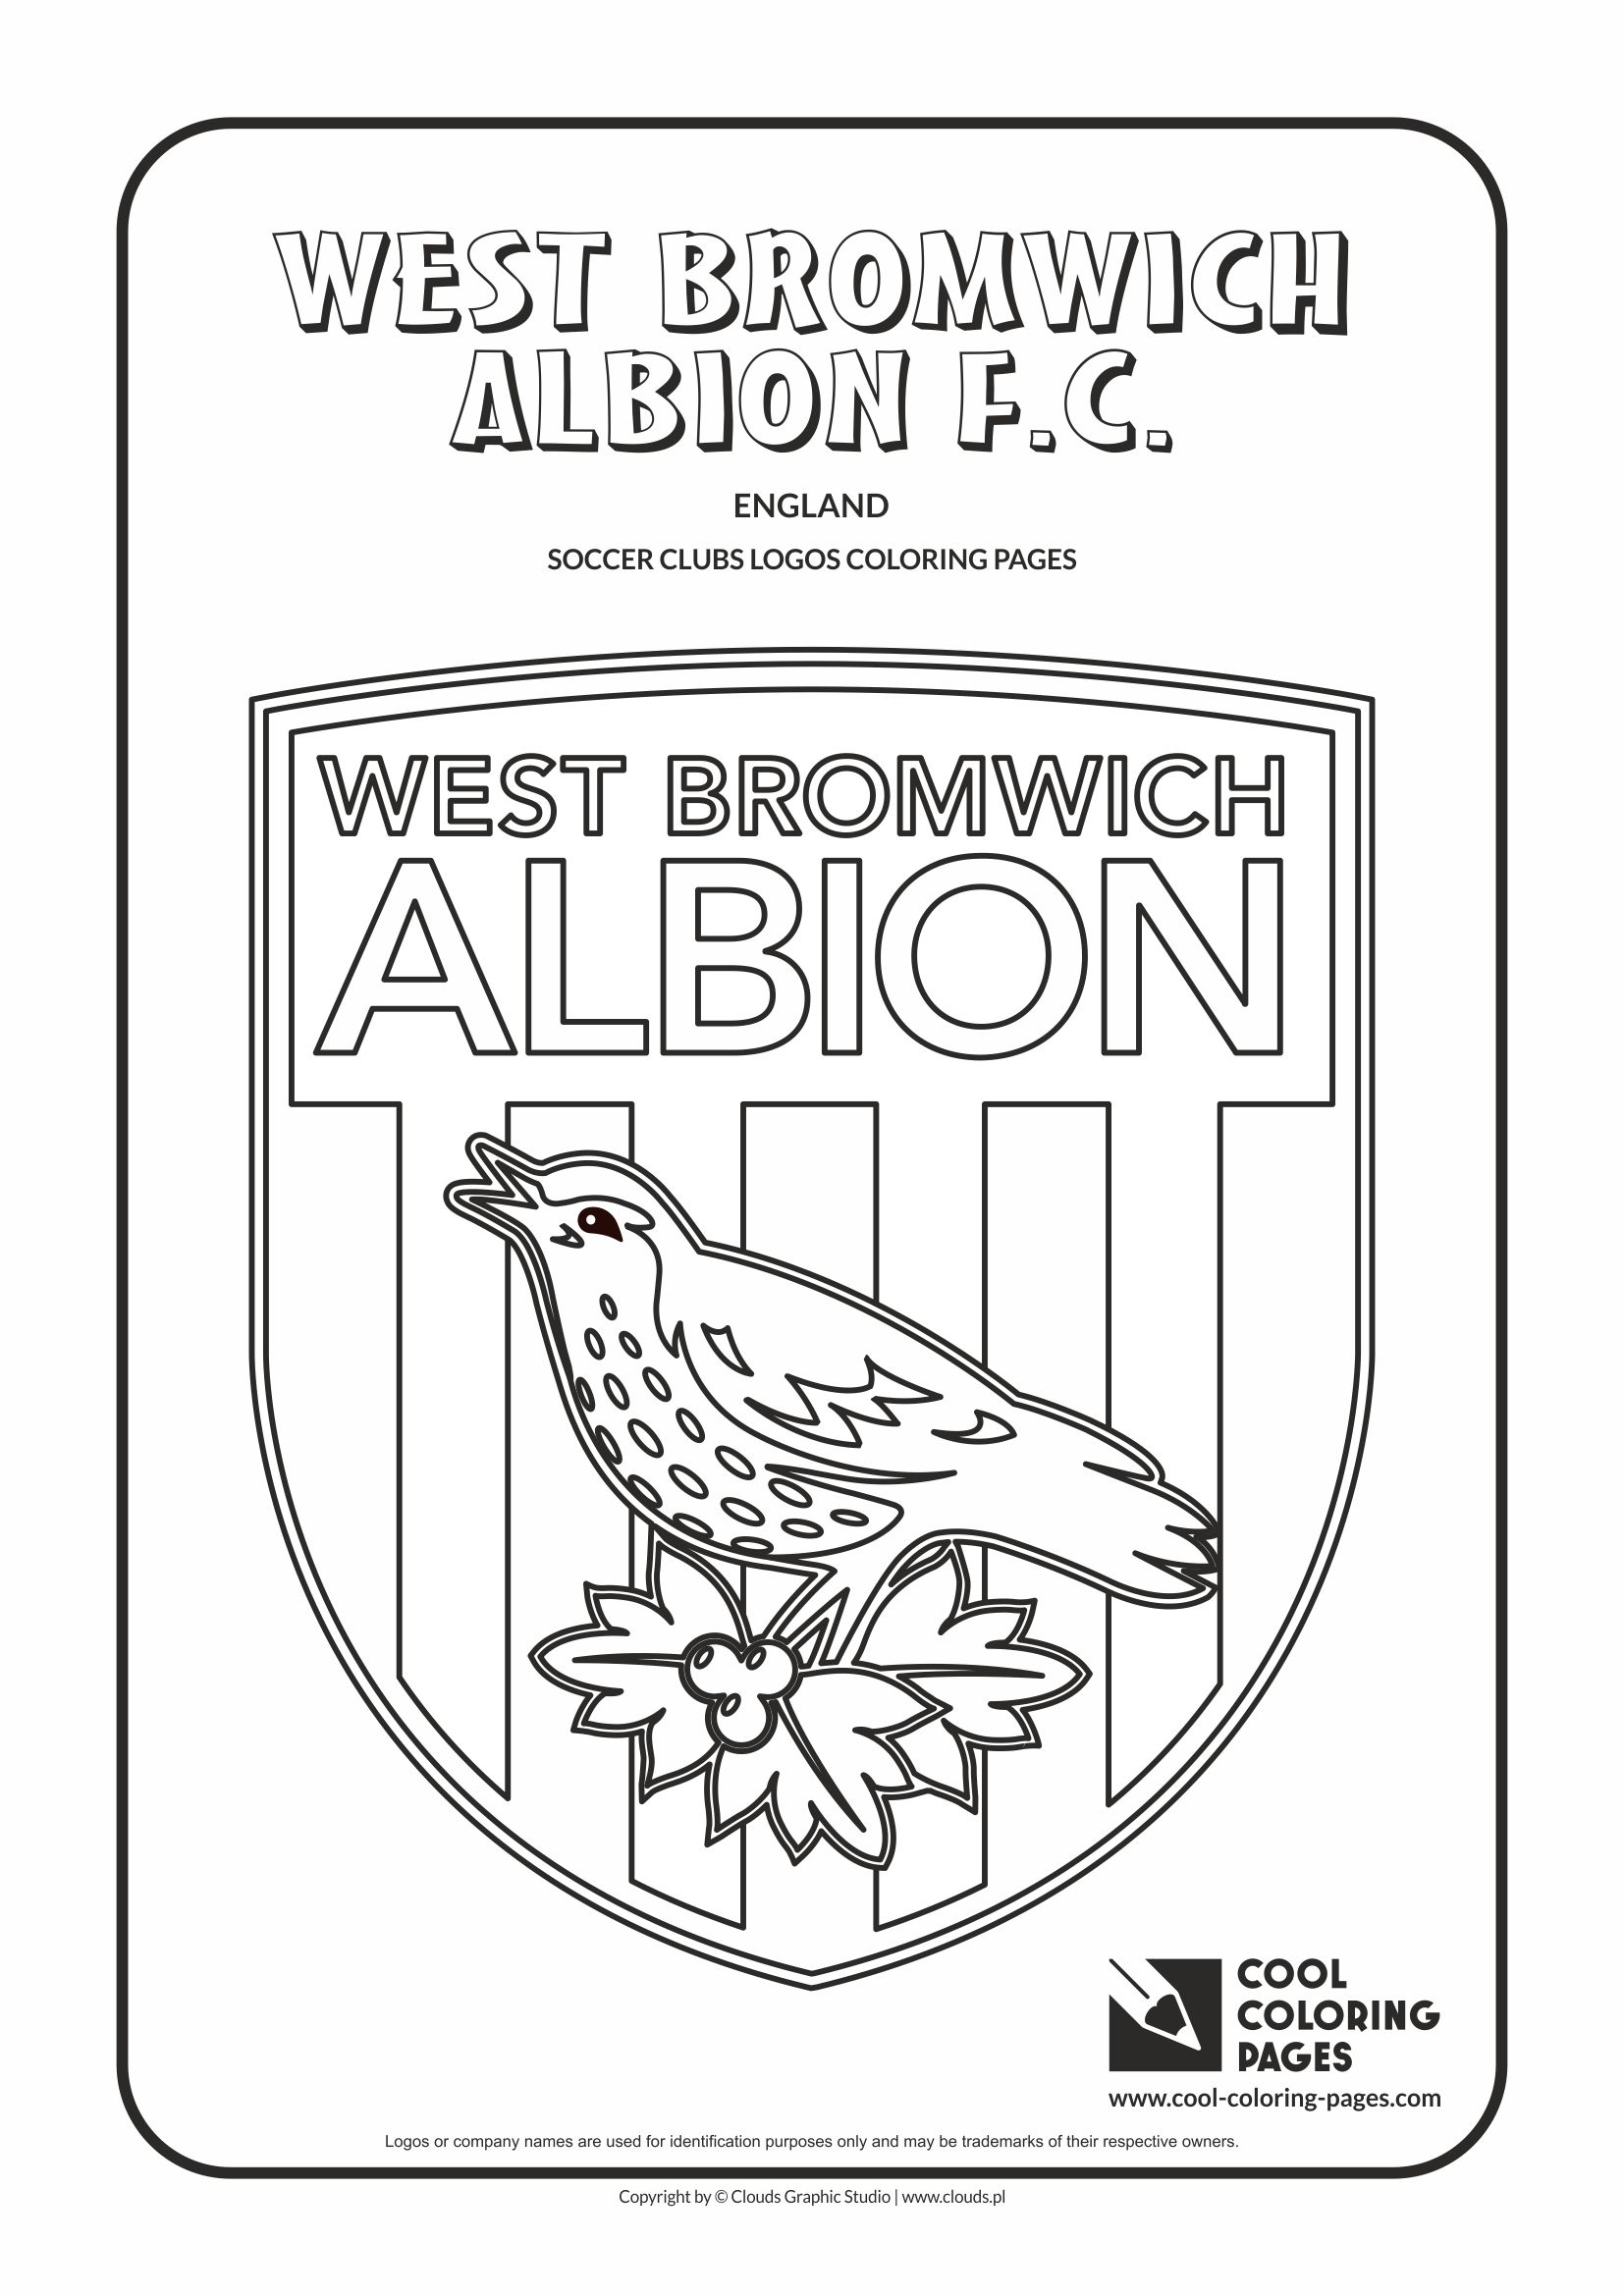 West Bromwich Albion F.C. logo coloring / Coloring page with West Bromwich Albion F.C. logo / West Brom logo colouring page.